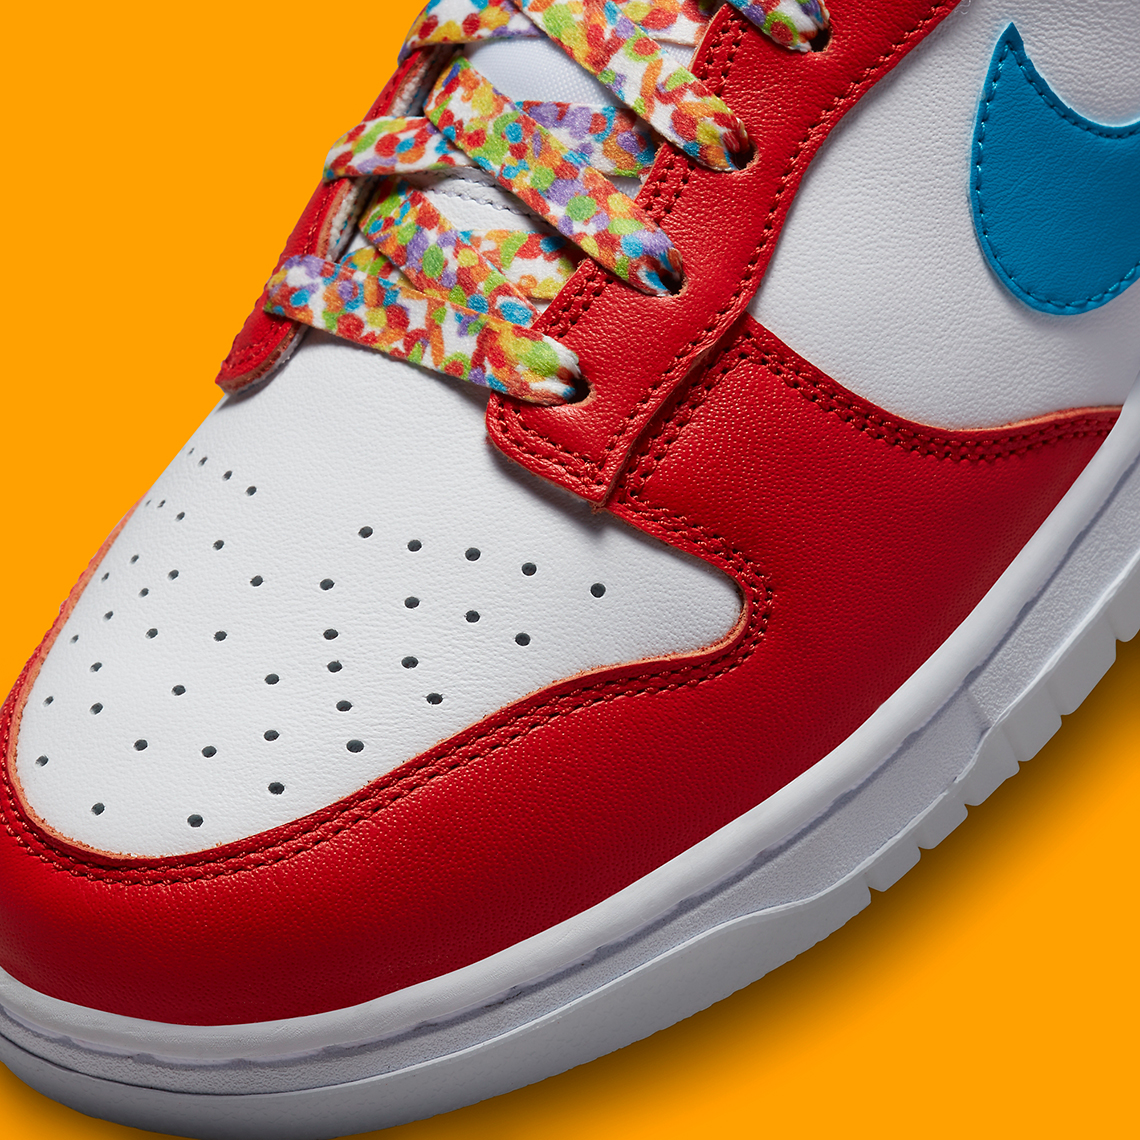 nike dunk low fruity pebbles lebron james dh8009 600 release date4